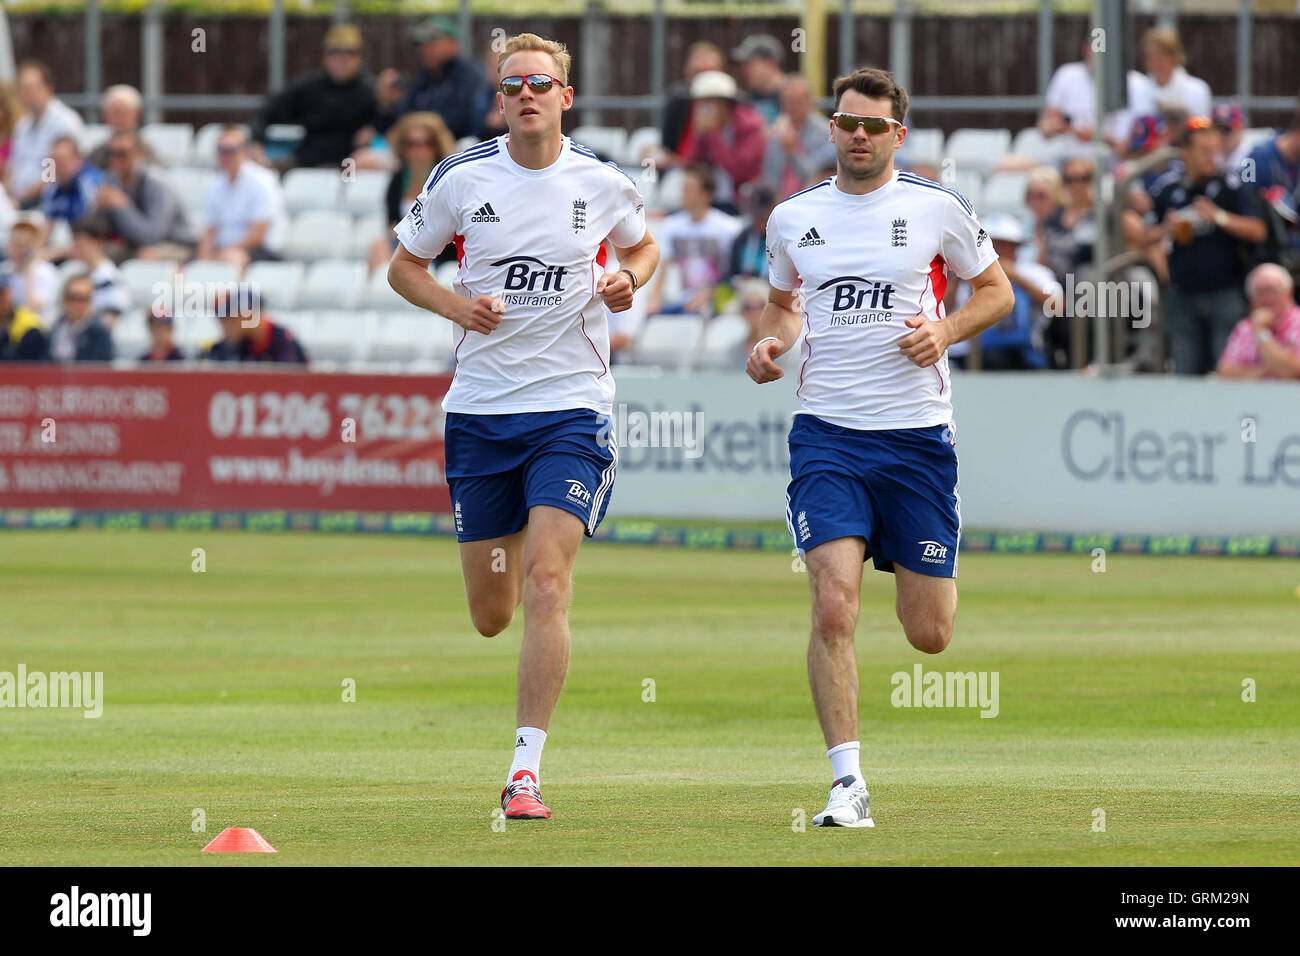 England bowlers Stuart Broad (L) and James Anderson - Essex CCC vs England - LV Challenge Match at the Essex County Ground, Chelmsford - 01/07/13 Stock Photo